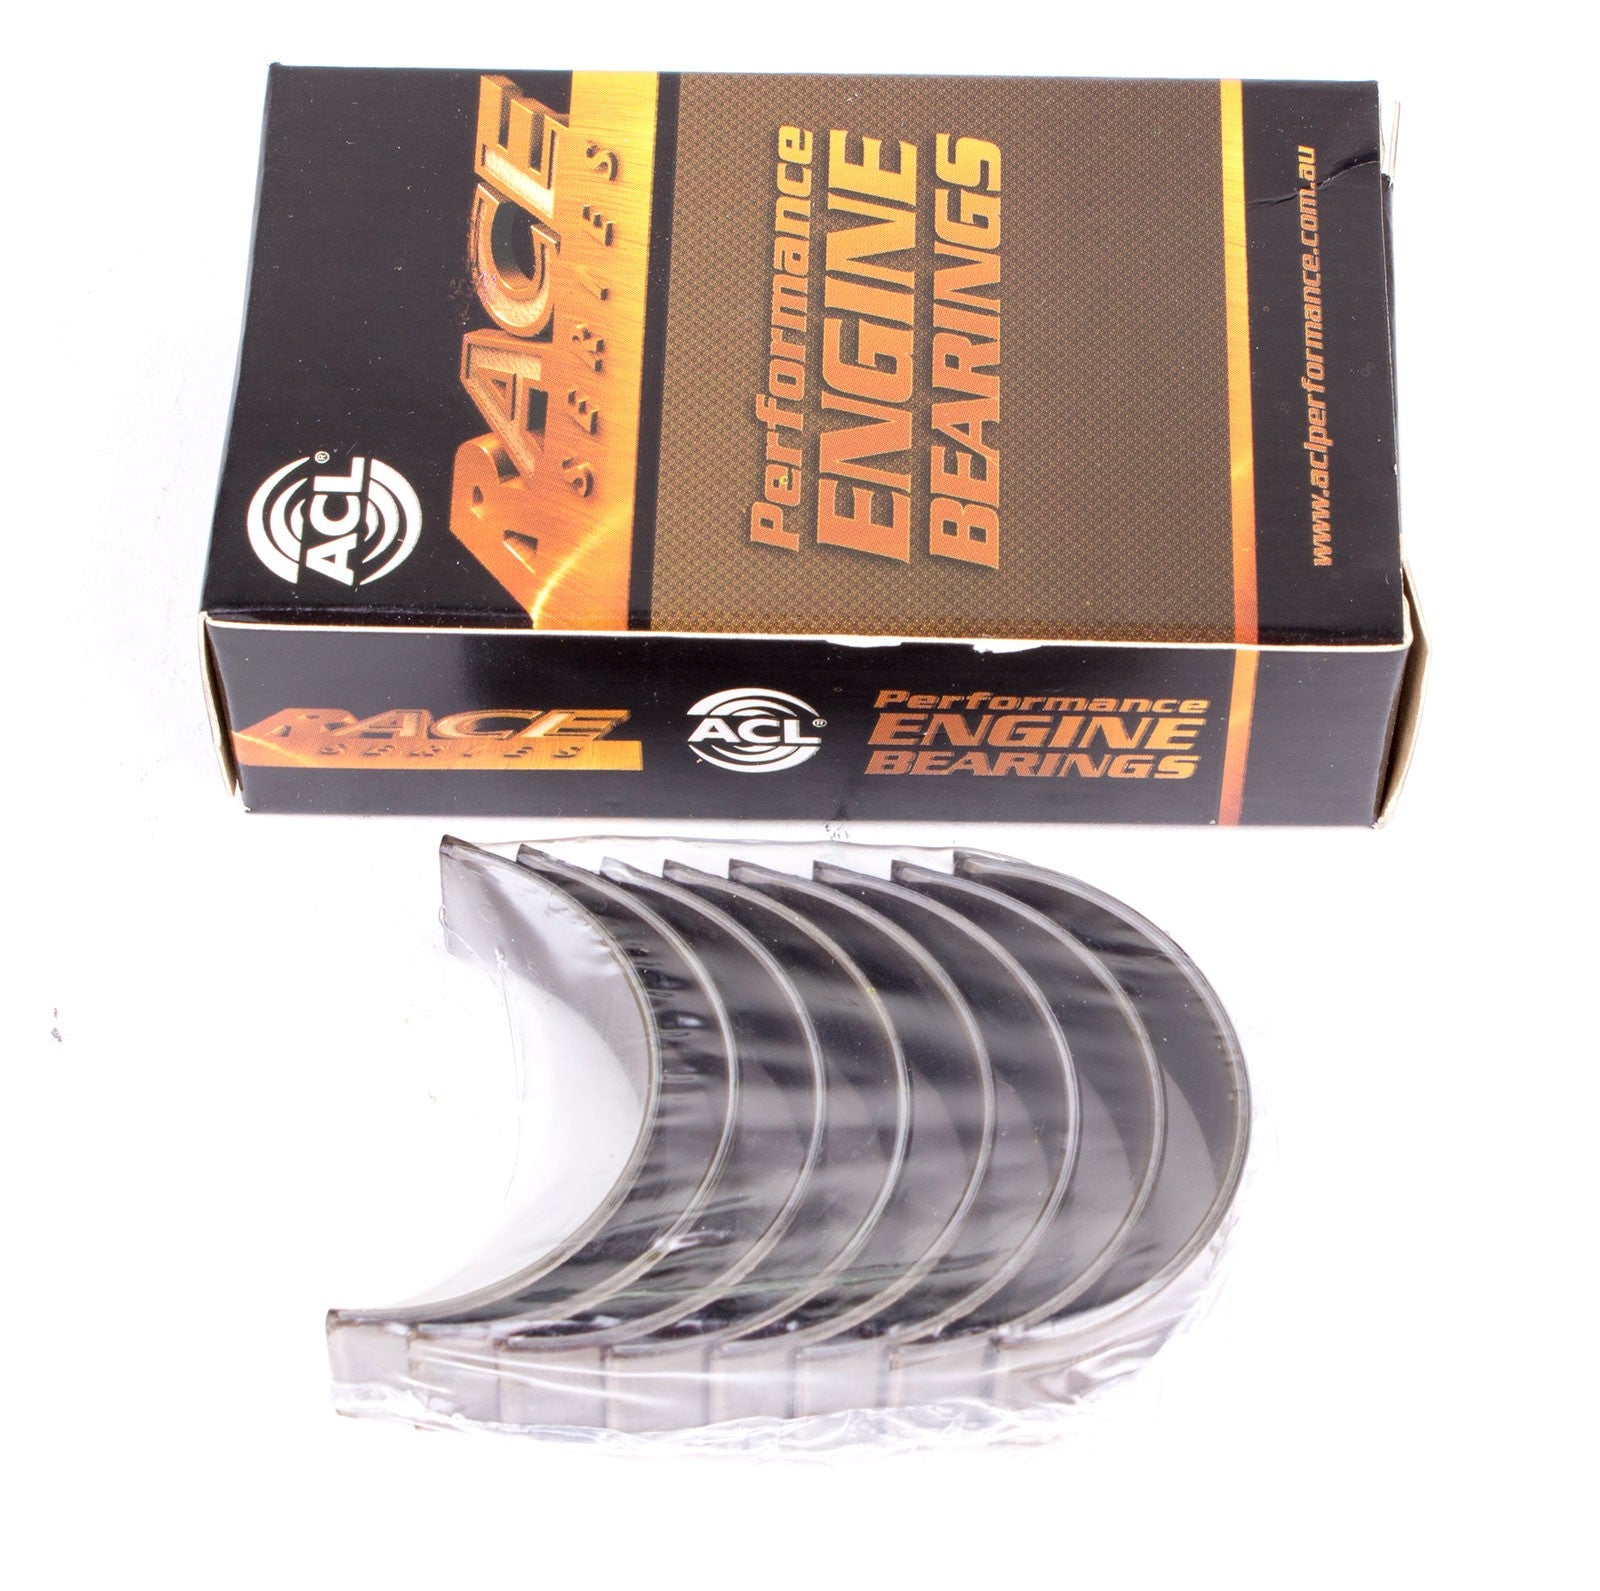 ACL 8B2356H-020 Con rod bearing set (ACL Race Series) Photo-0 